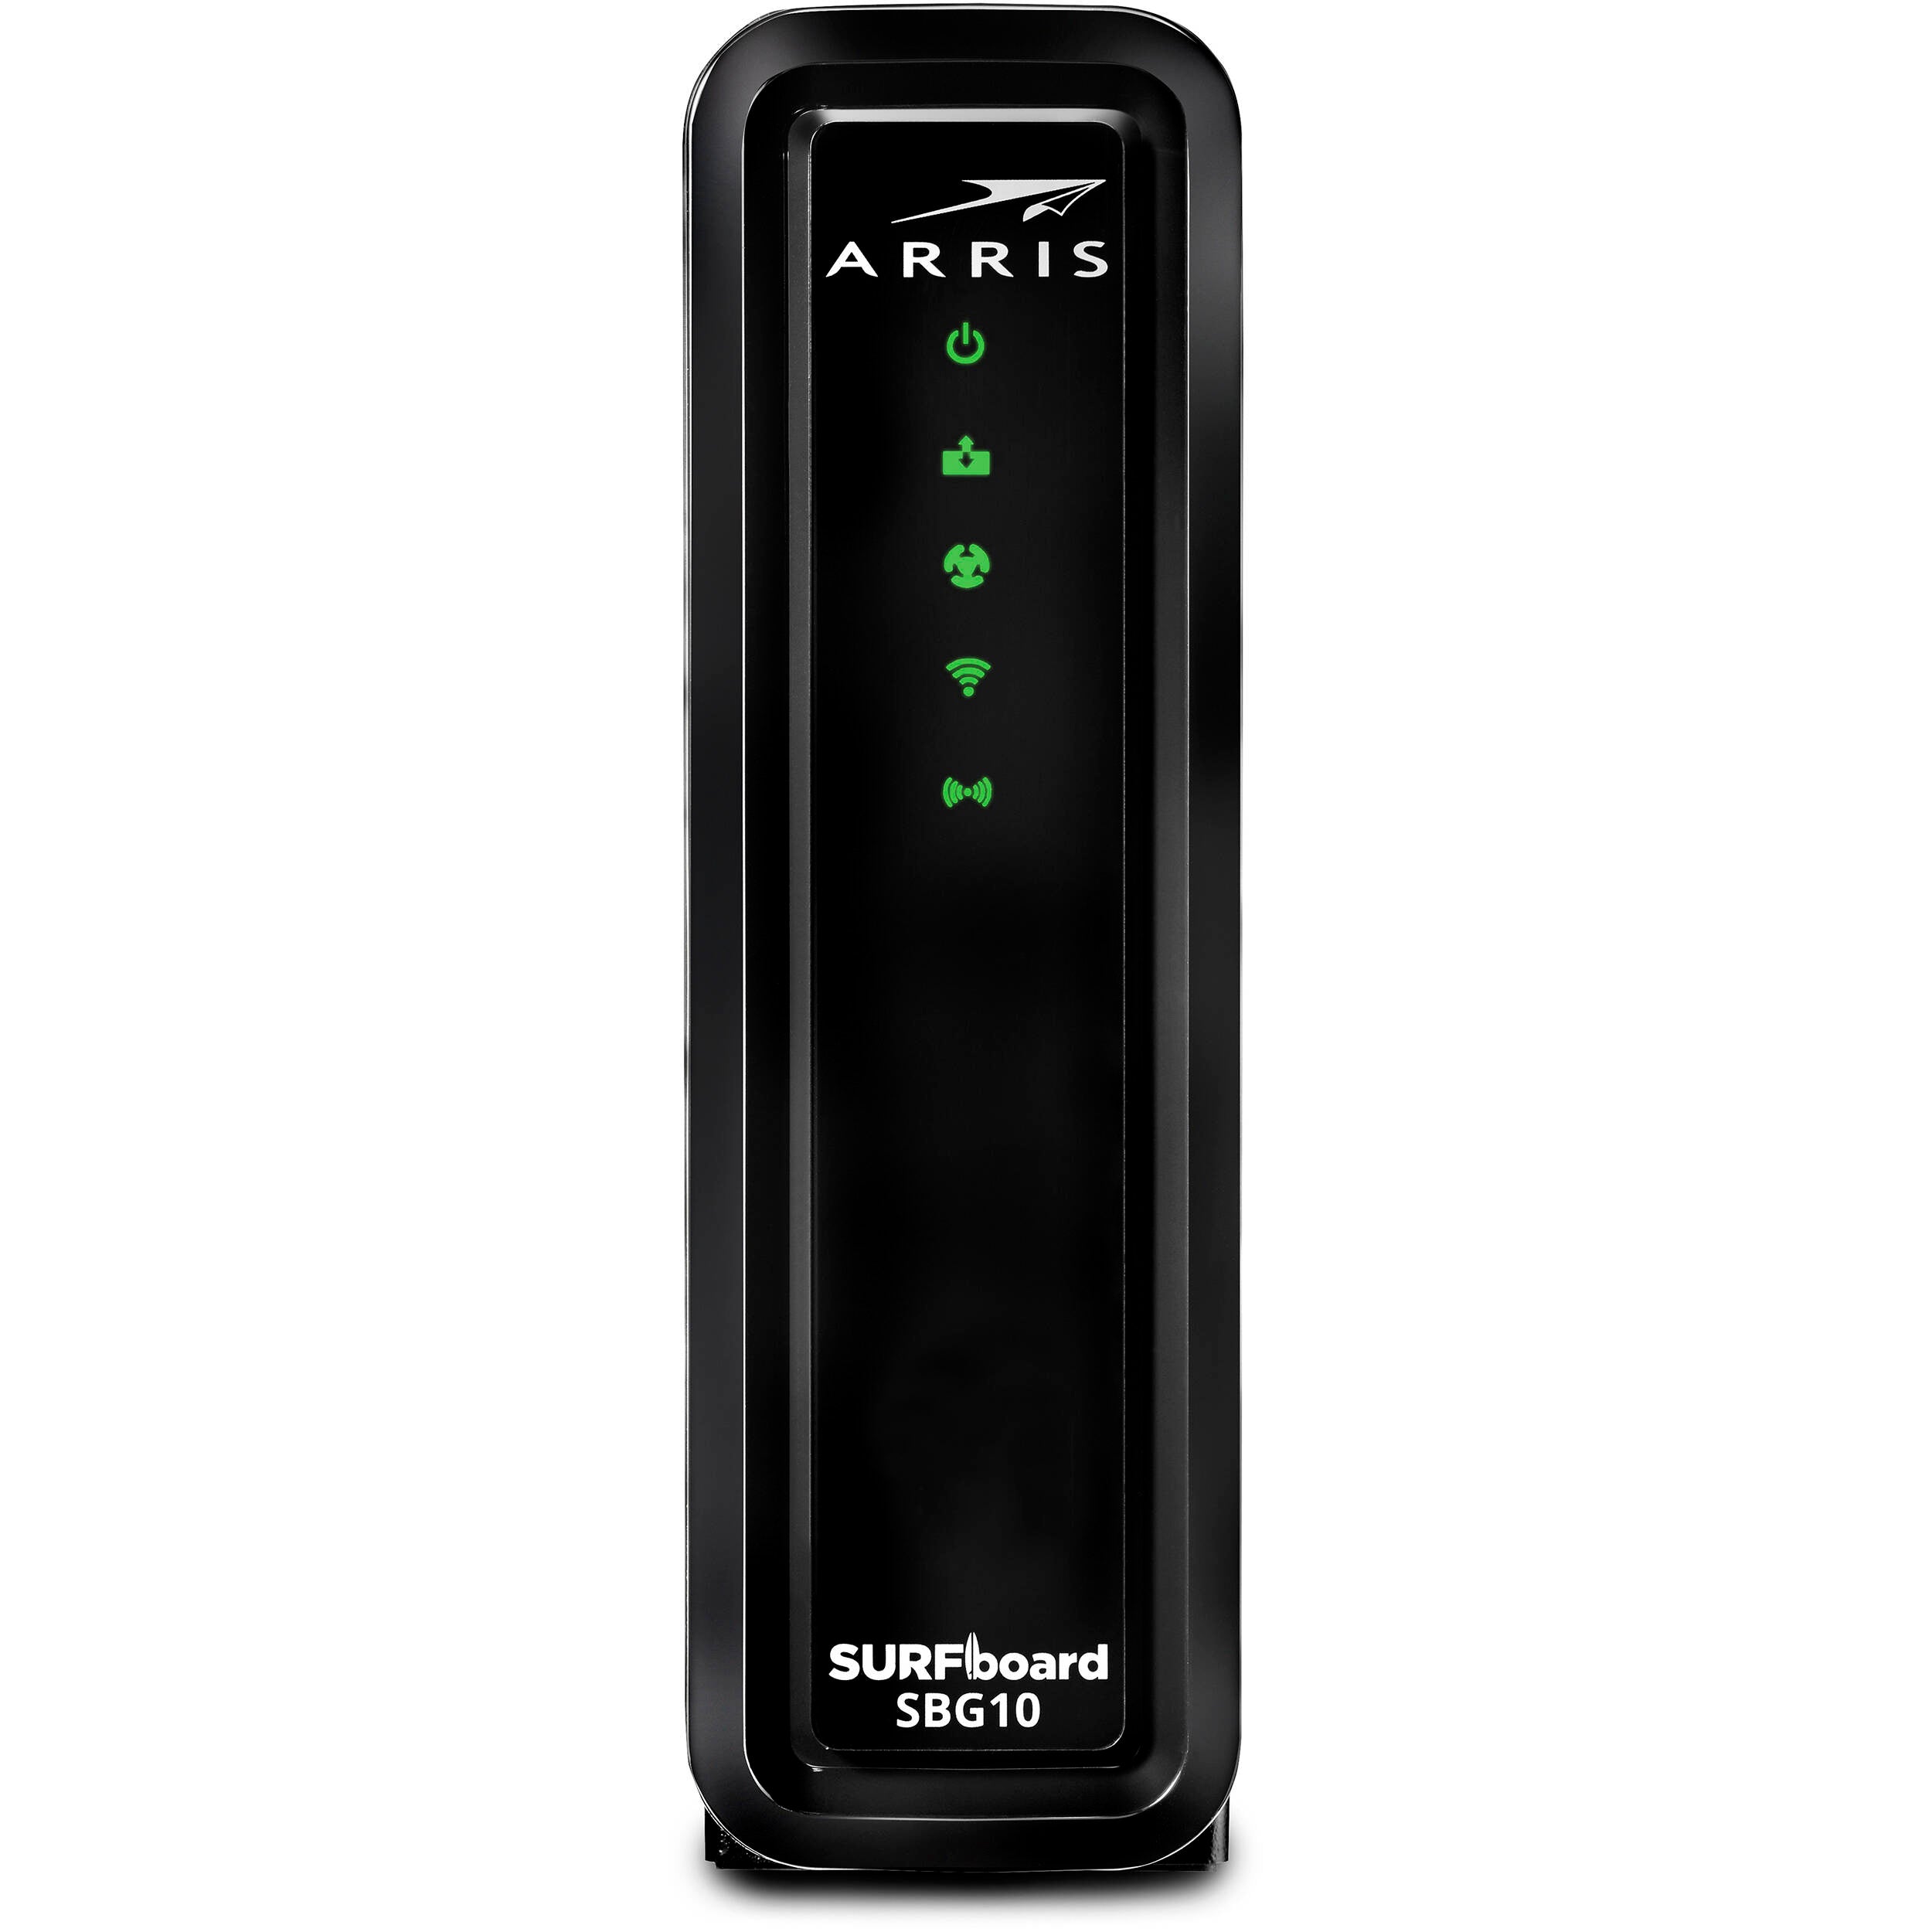 ARRIS SURFboard SBG10-RB DOCSIS 3.0 16 x 4 Gigabit Cable Modem & AC1600 Wi-Fi Router - Certified Refurbished